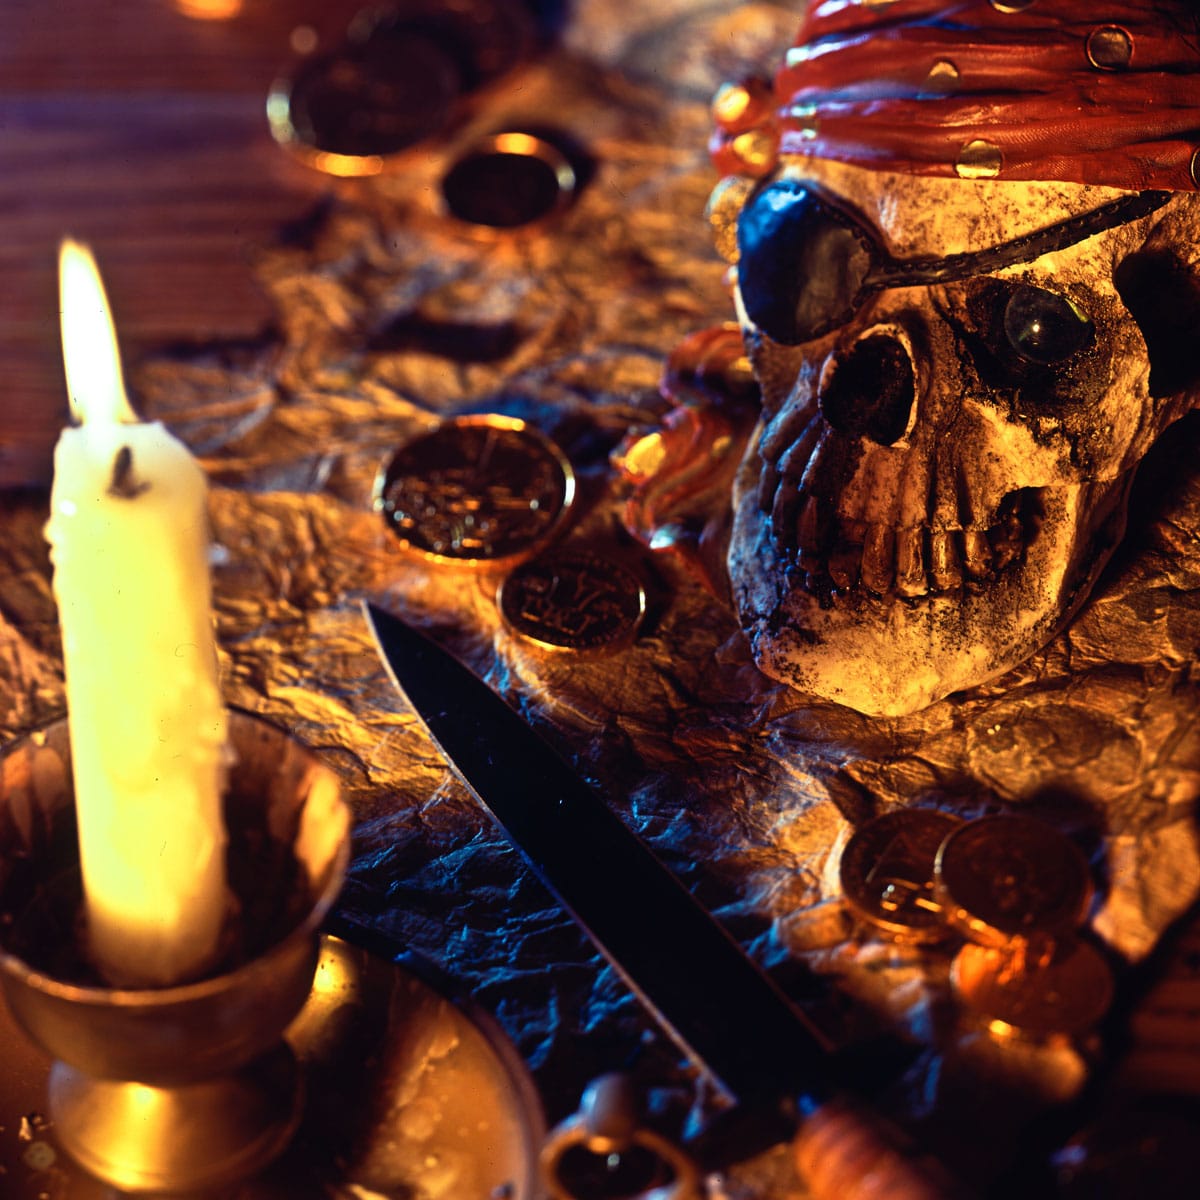 Aged Miniature Skull Gothic Candlestick Holder on A Rustic